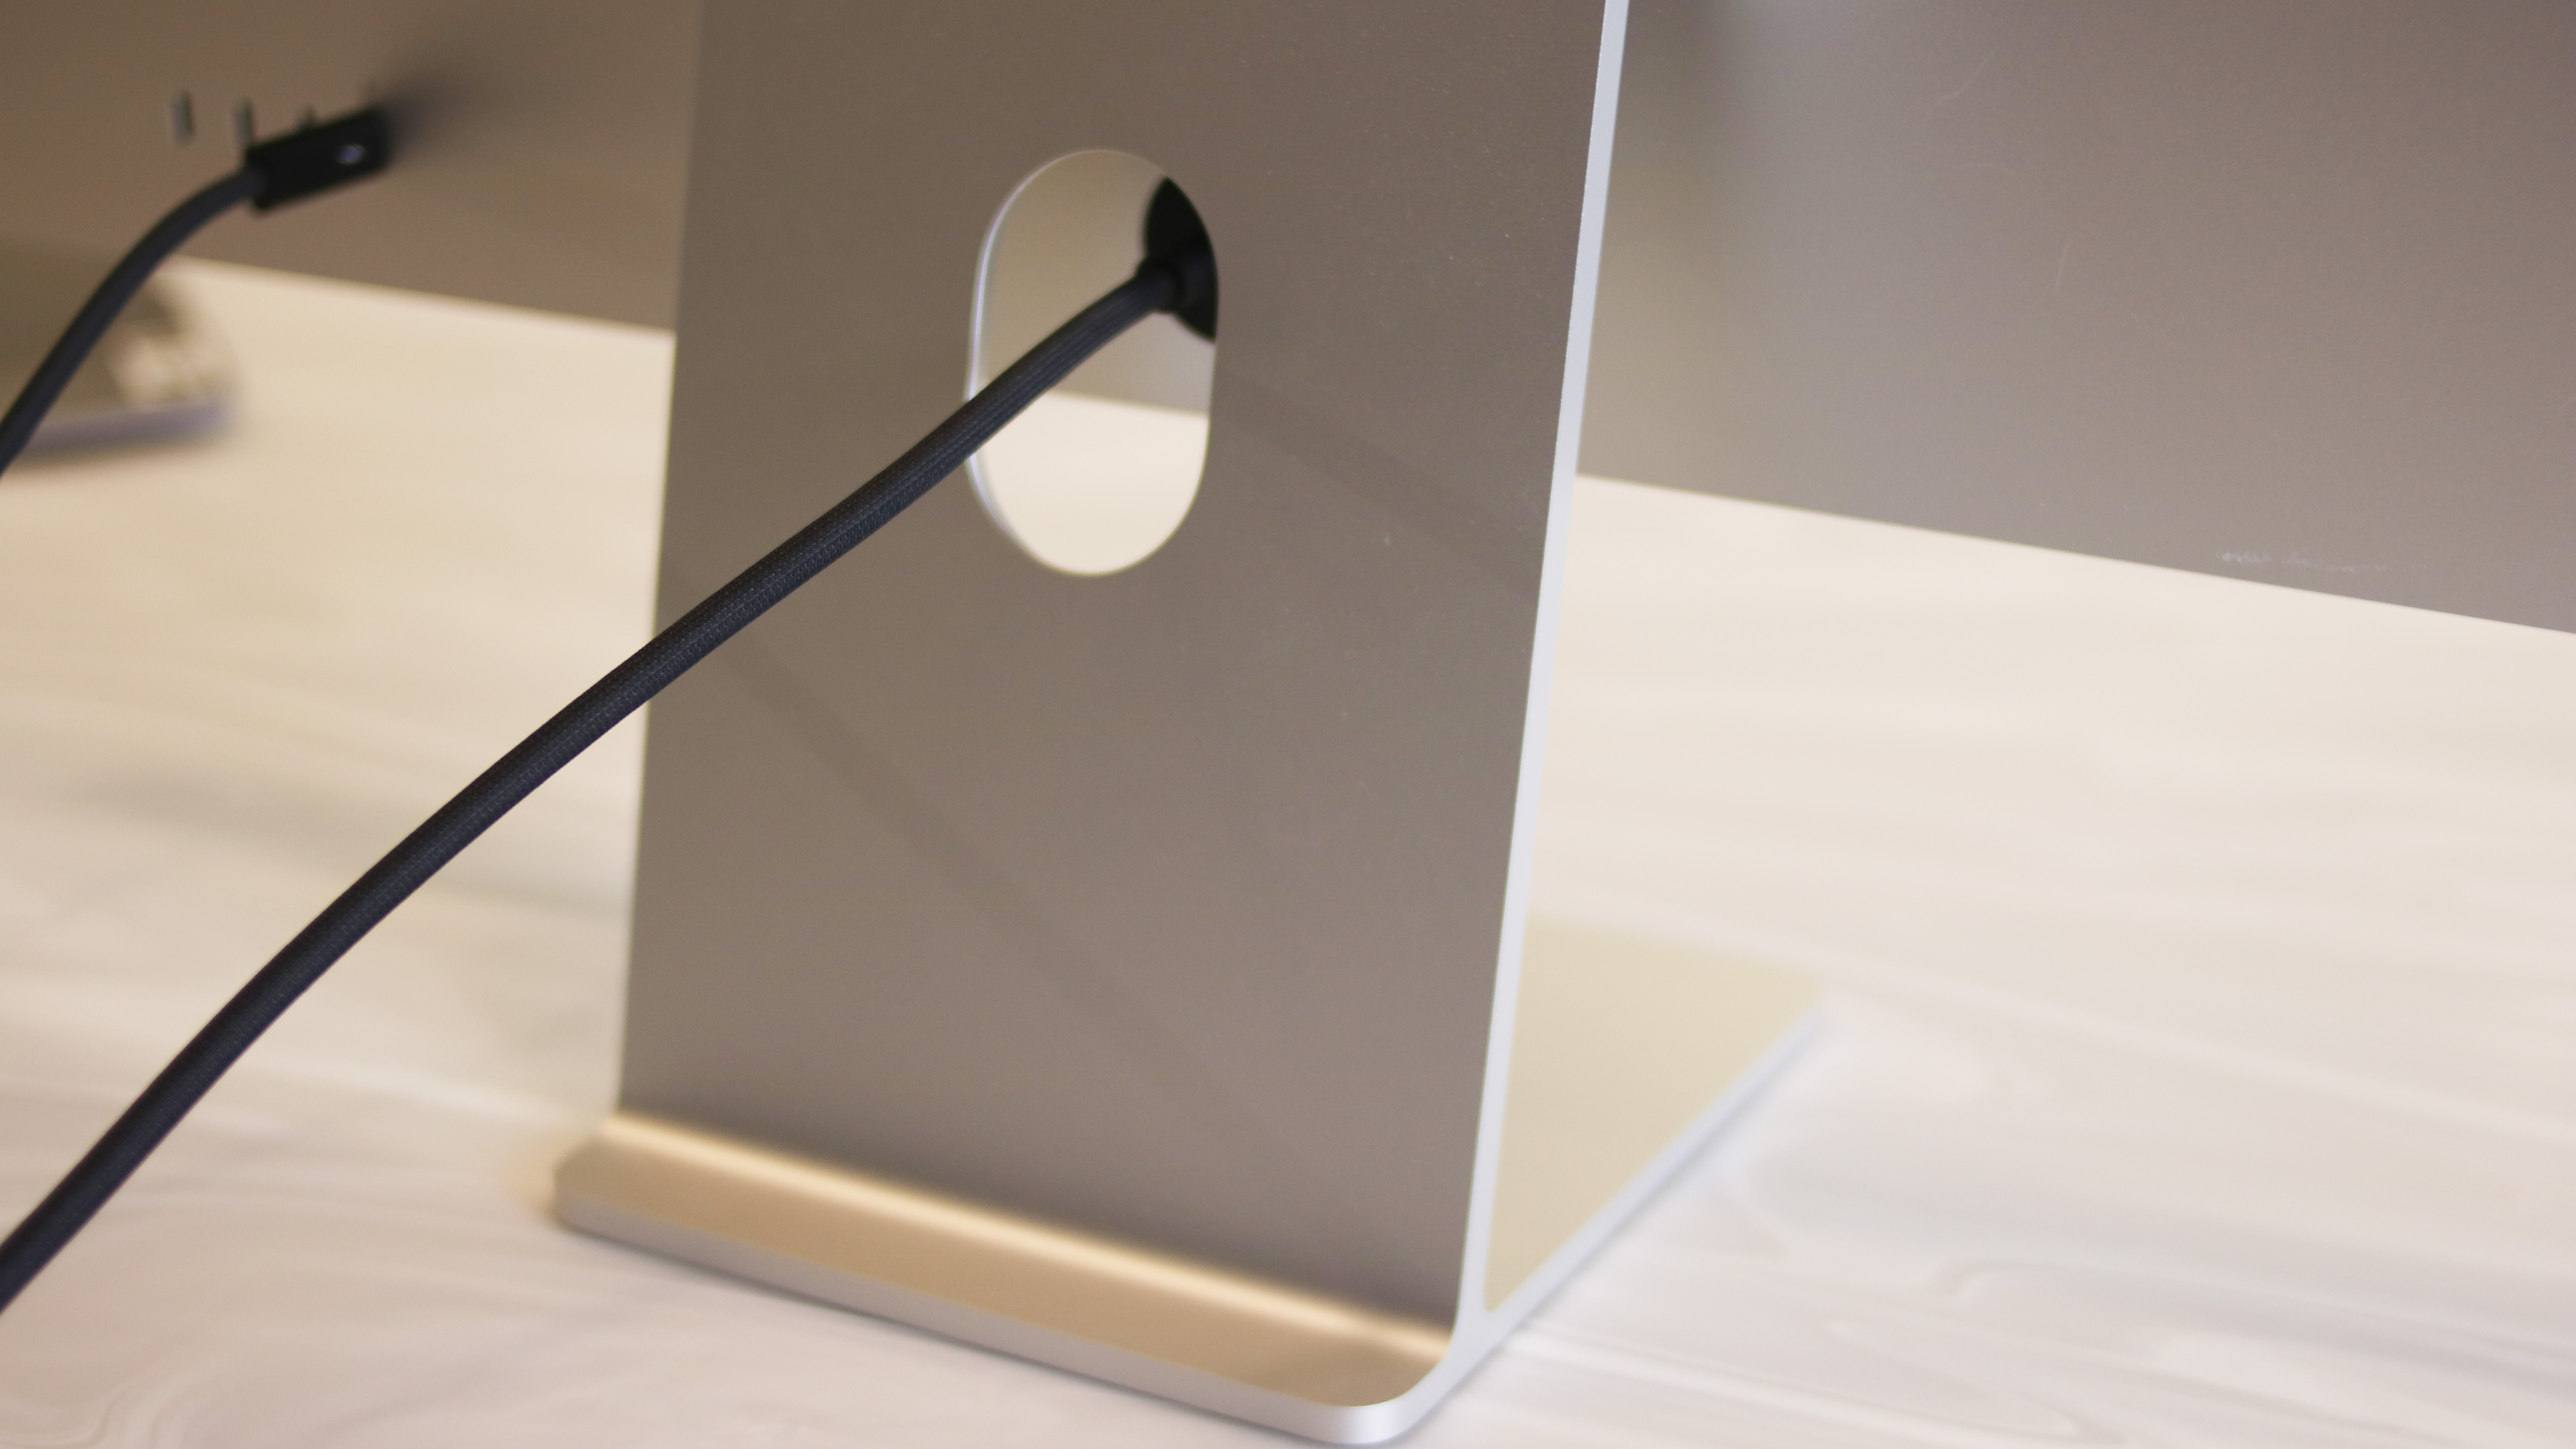 The stand on the Apple Studio Display